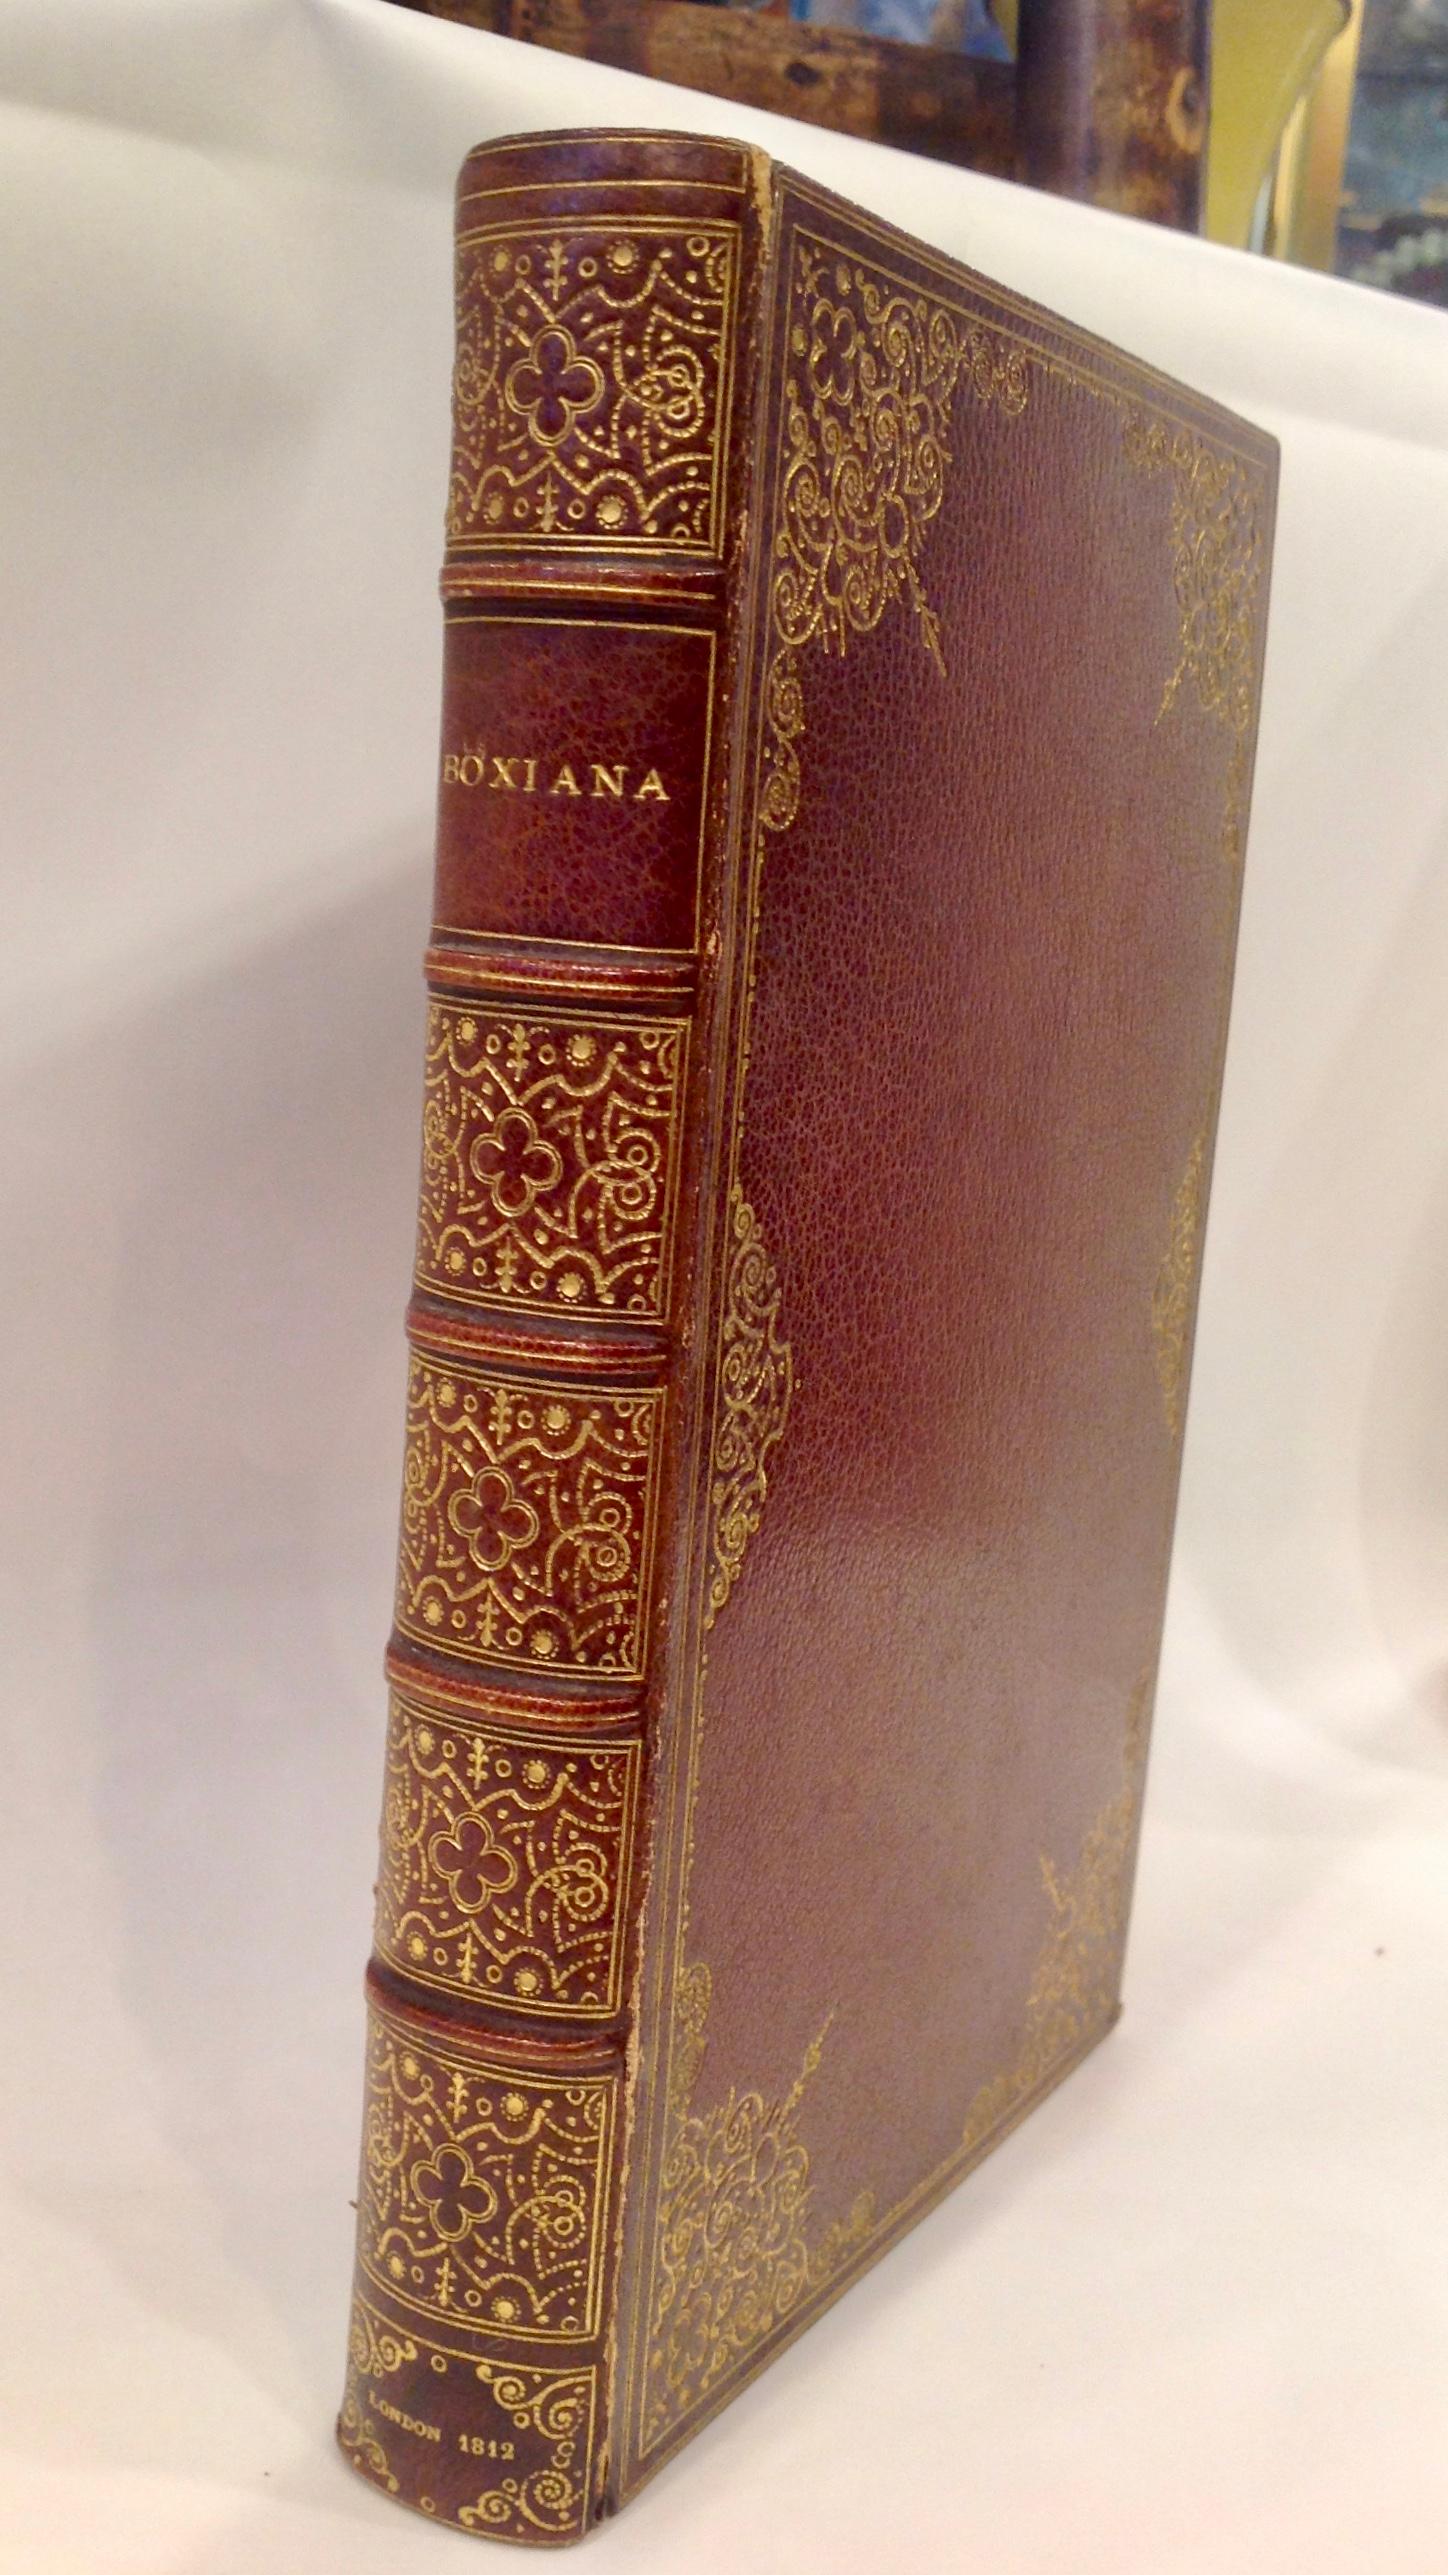 A fine period illustrated book. The exterior of embossed leather boasts original
gilt edges. Gilt accented tooling.
The book is profusely illustrated - some are fold out.
A rare and sought after, and definitive original edition.